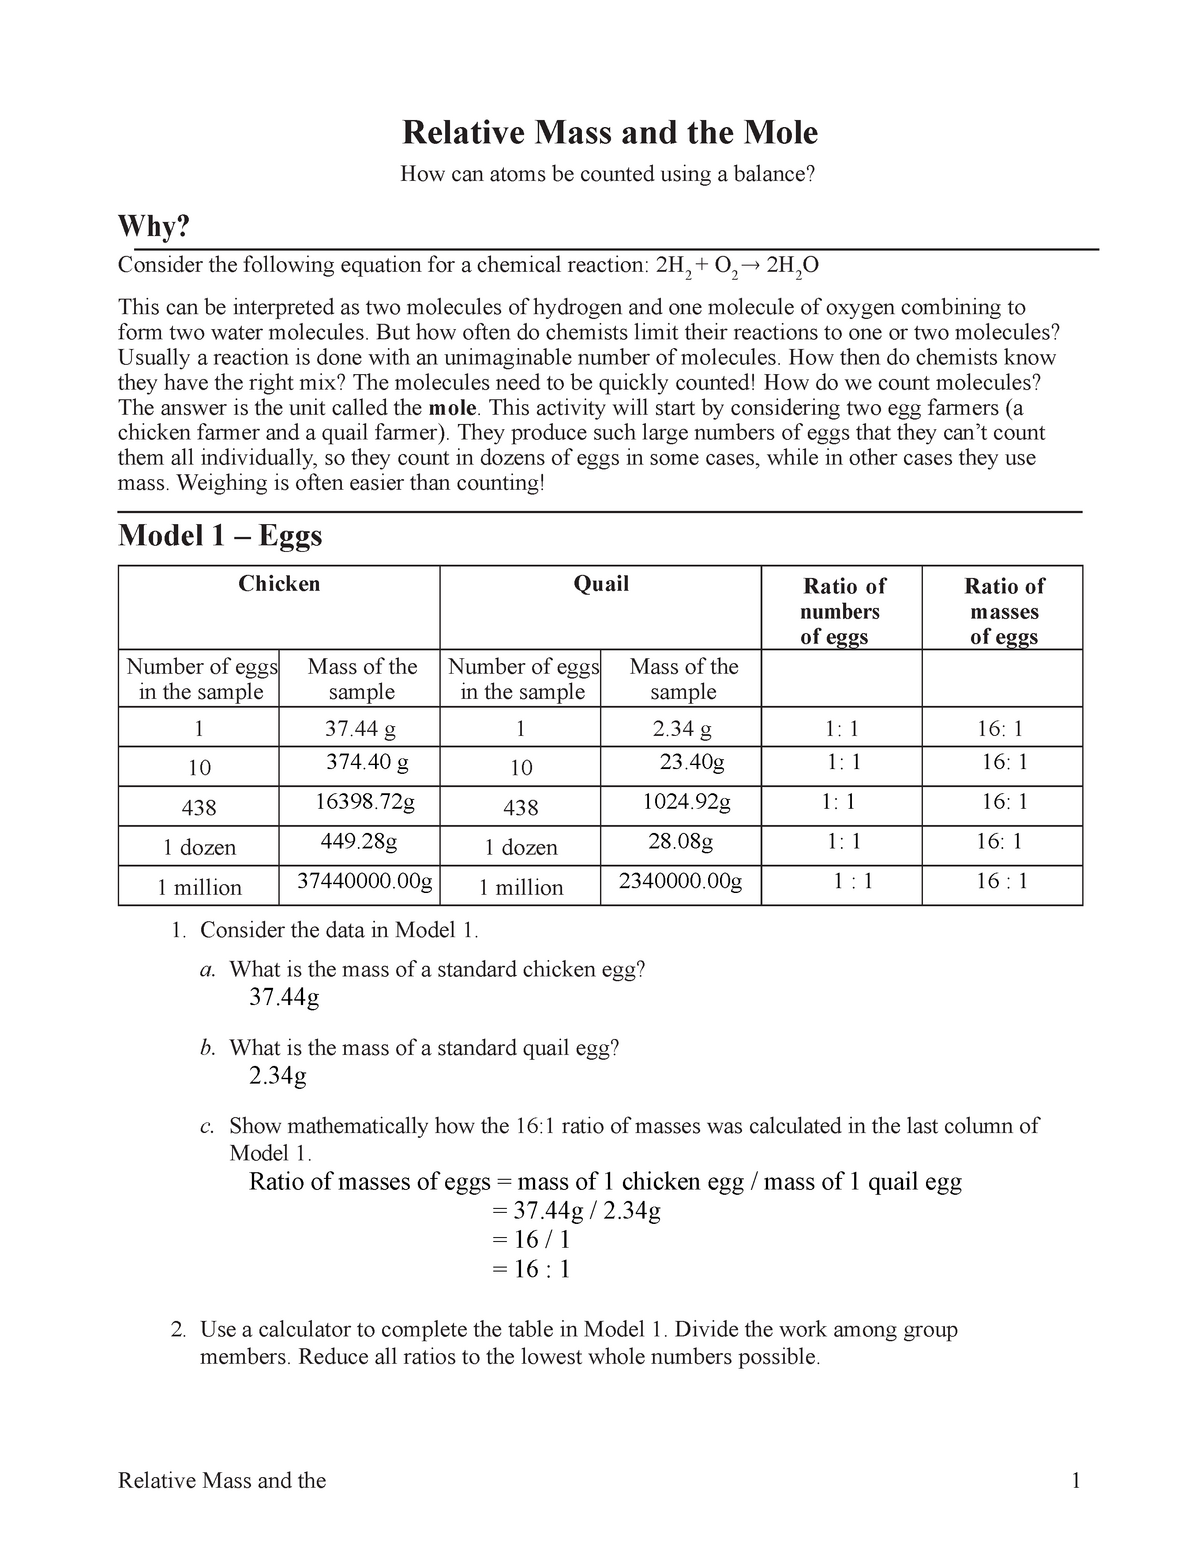 relative-mass-and-the-mole-worksheet-answer-key-waltery-learning